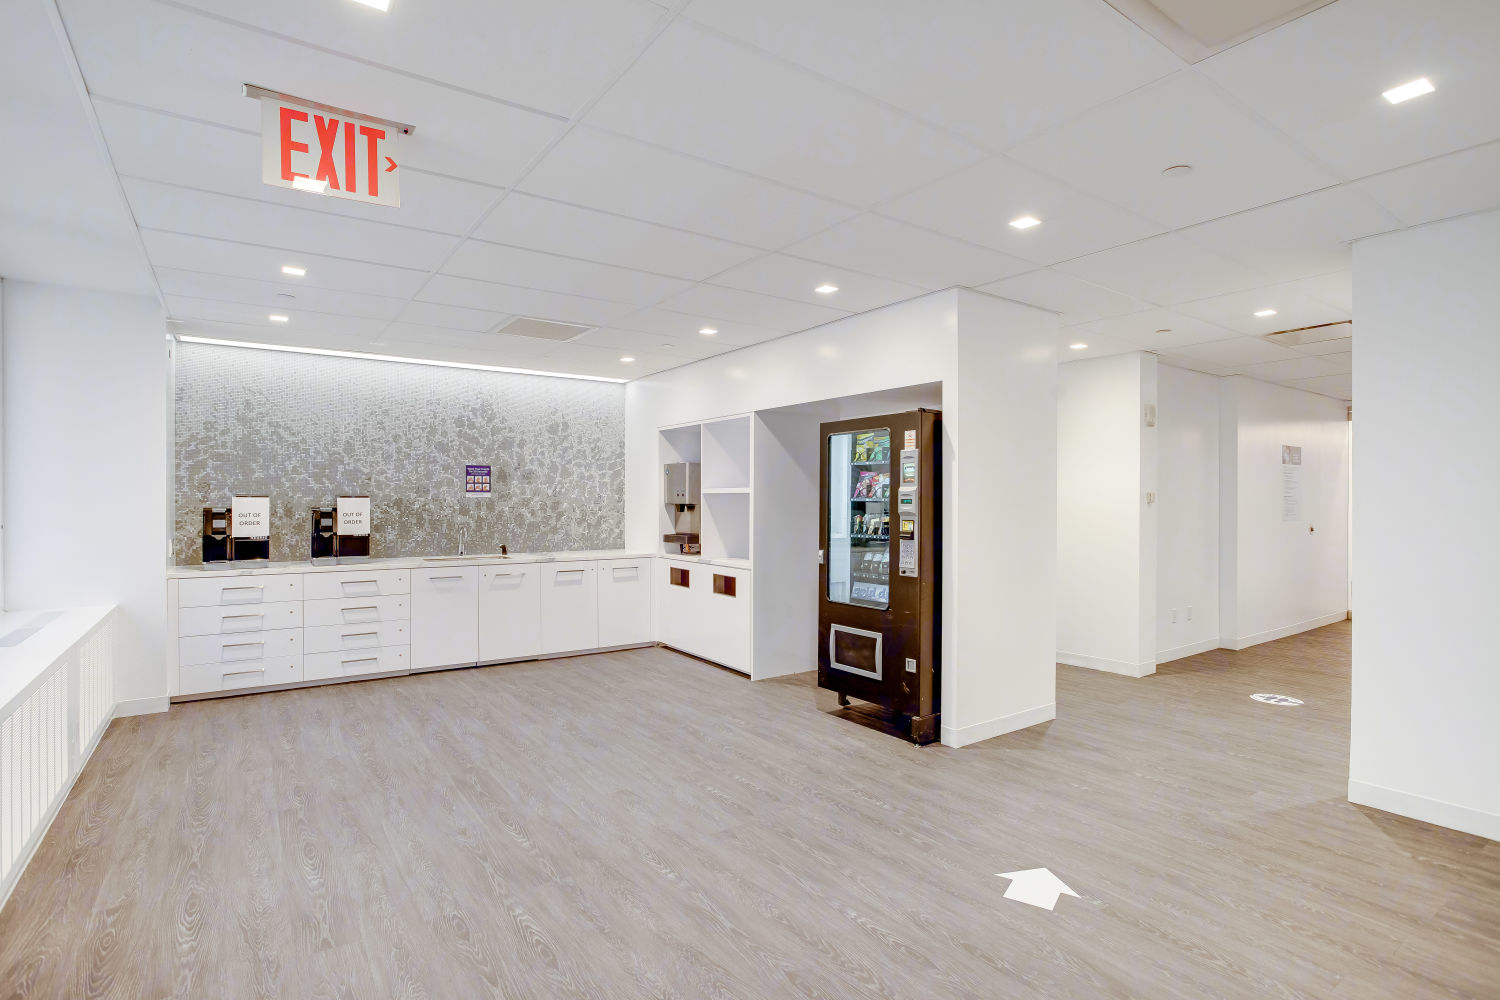 Bloxtrade, 55 Water St, New York, NY, Financial Advisory Services - MapQuest